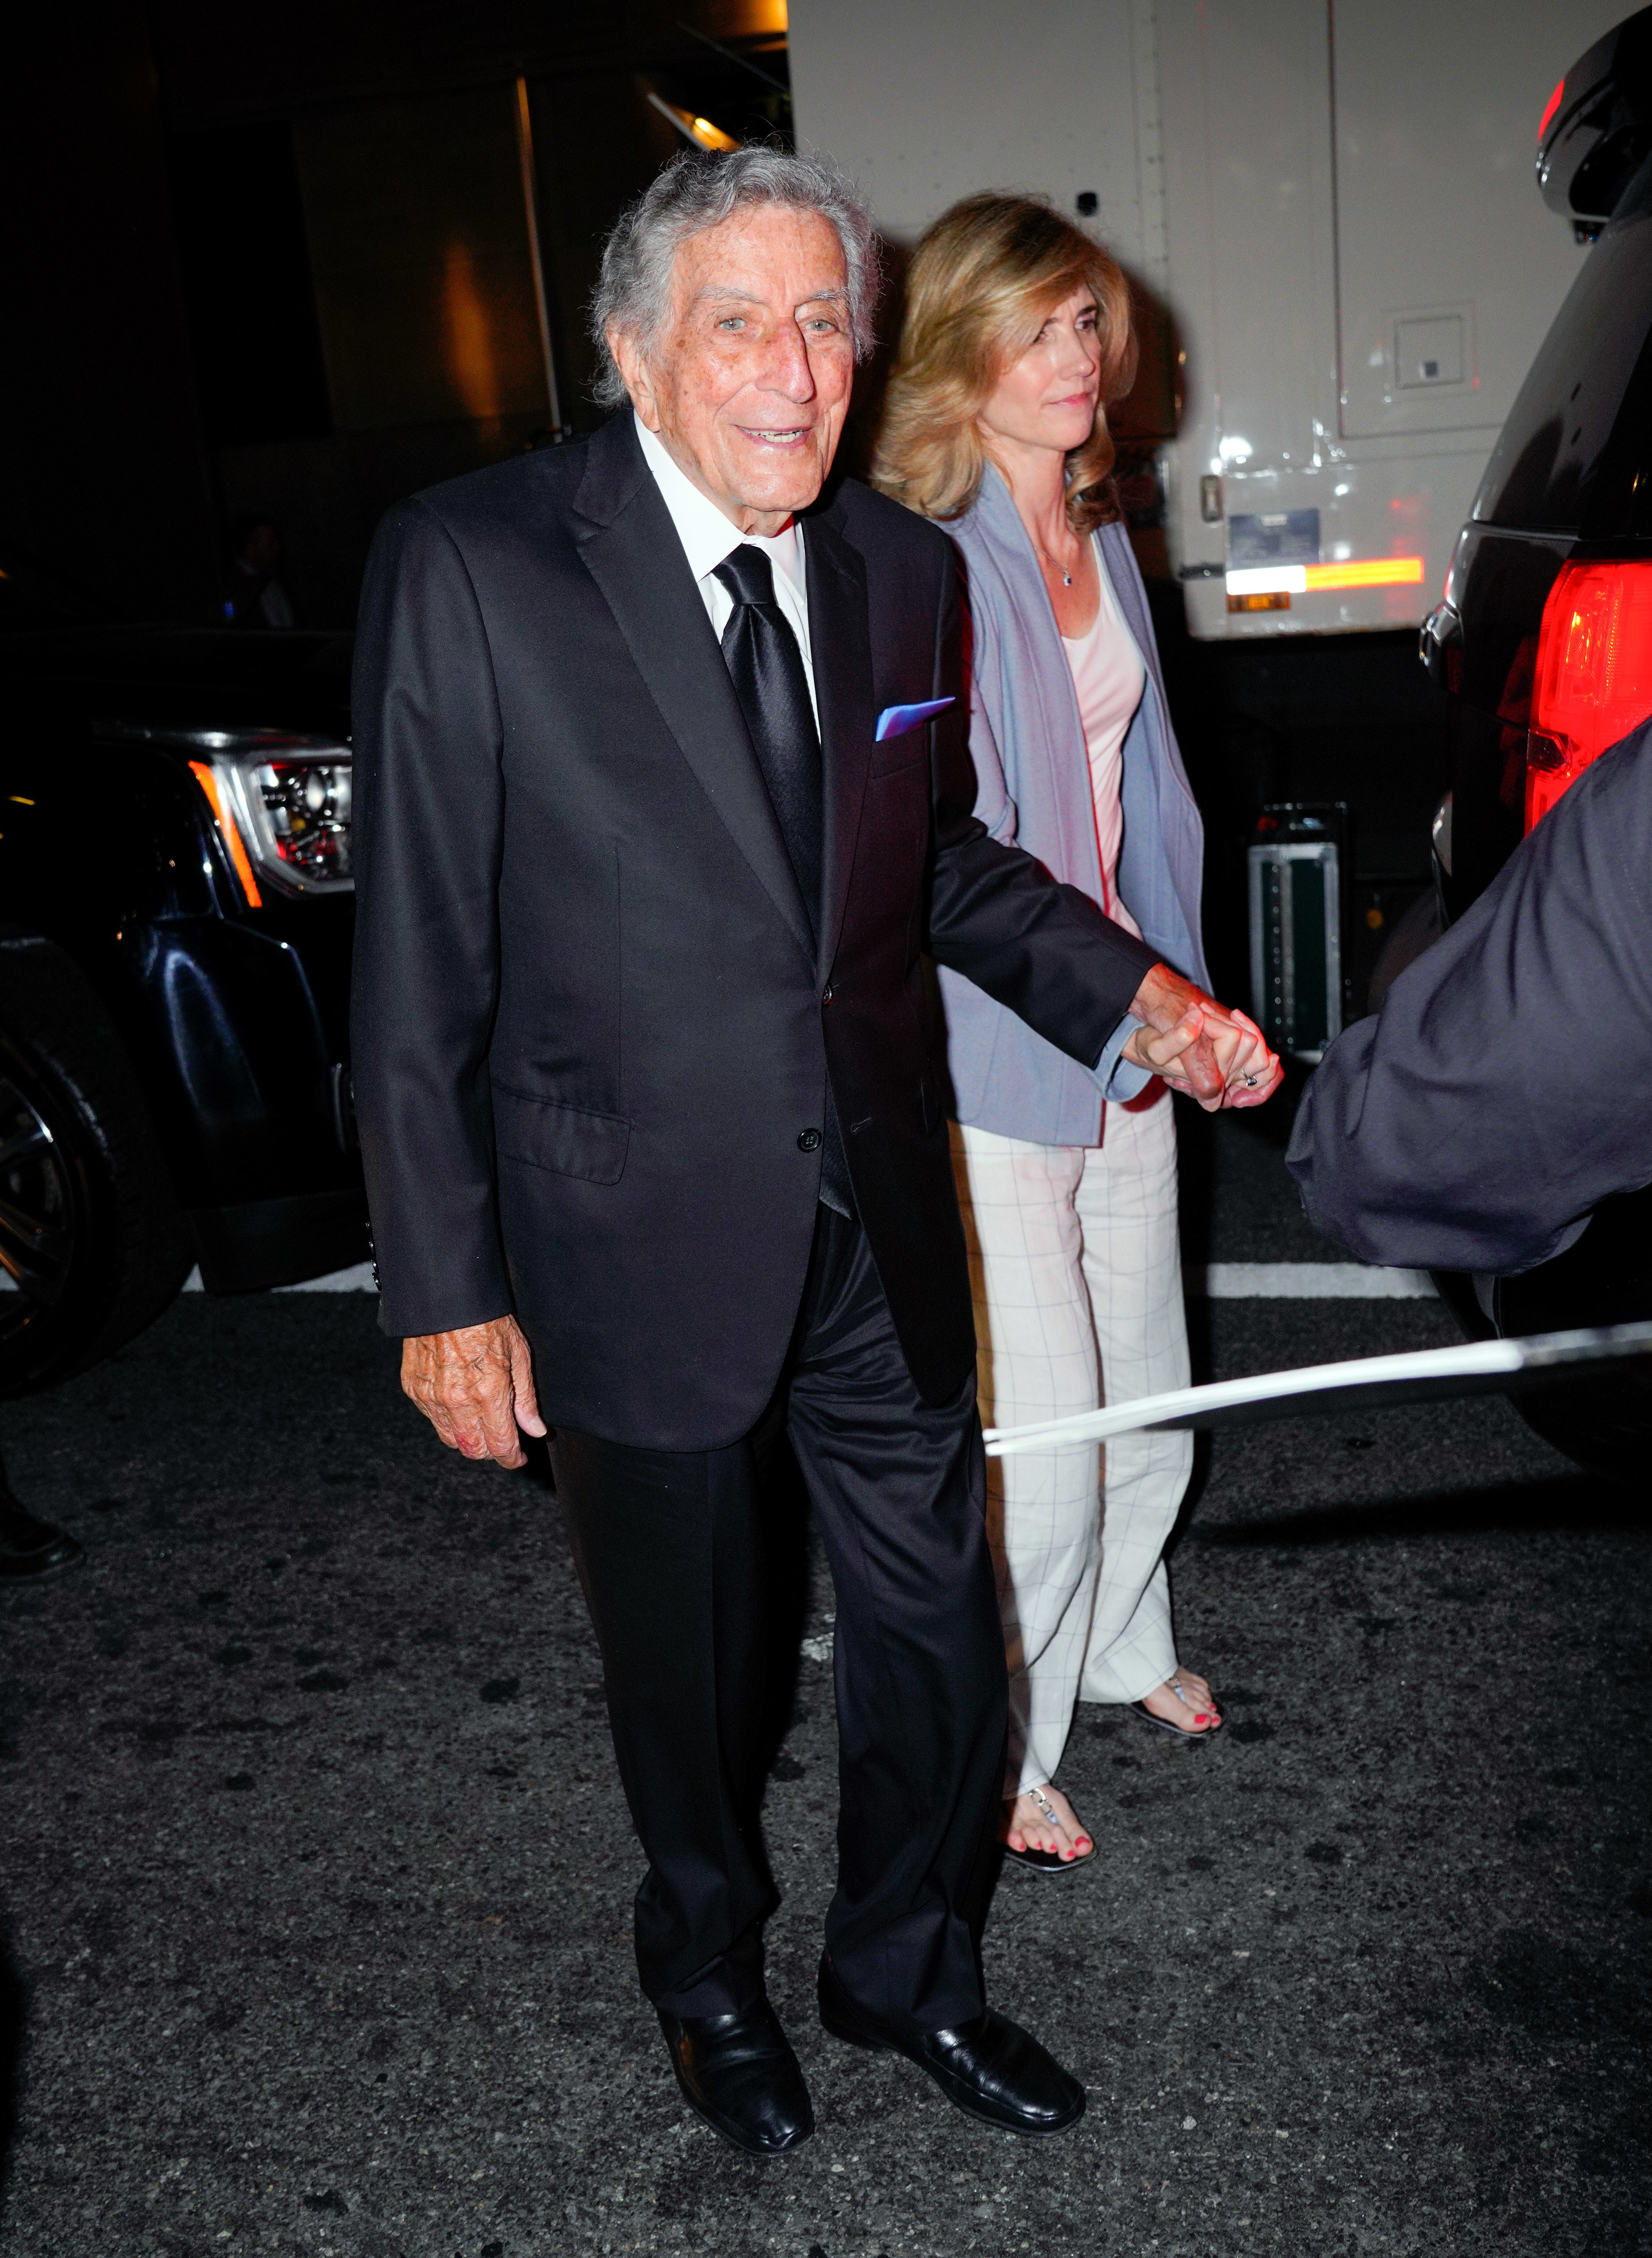 Tony walking hand-in-hand with his wife Susan